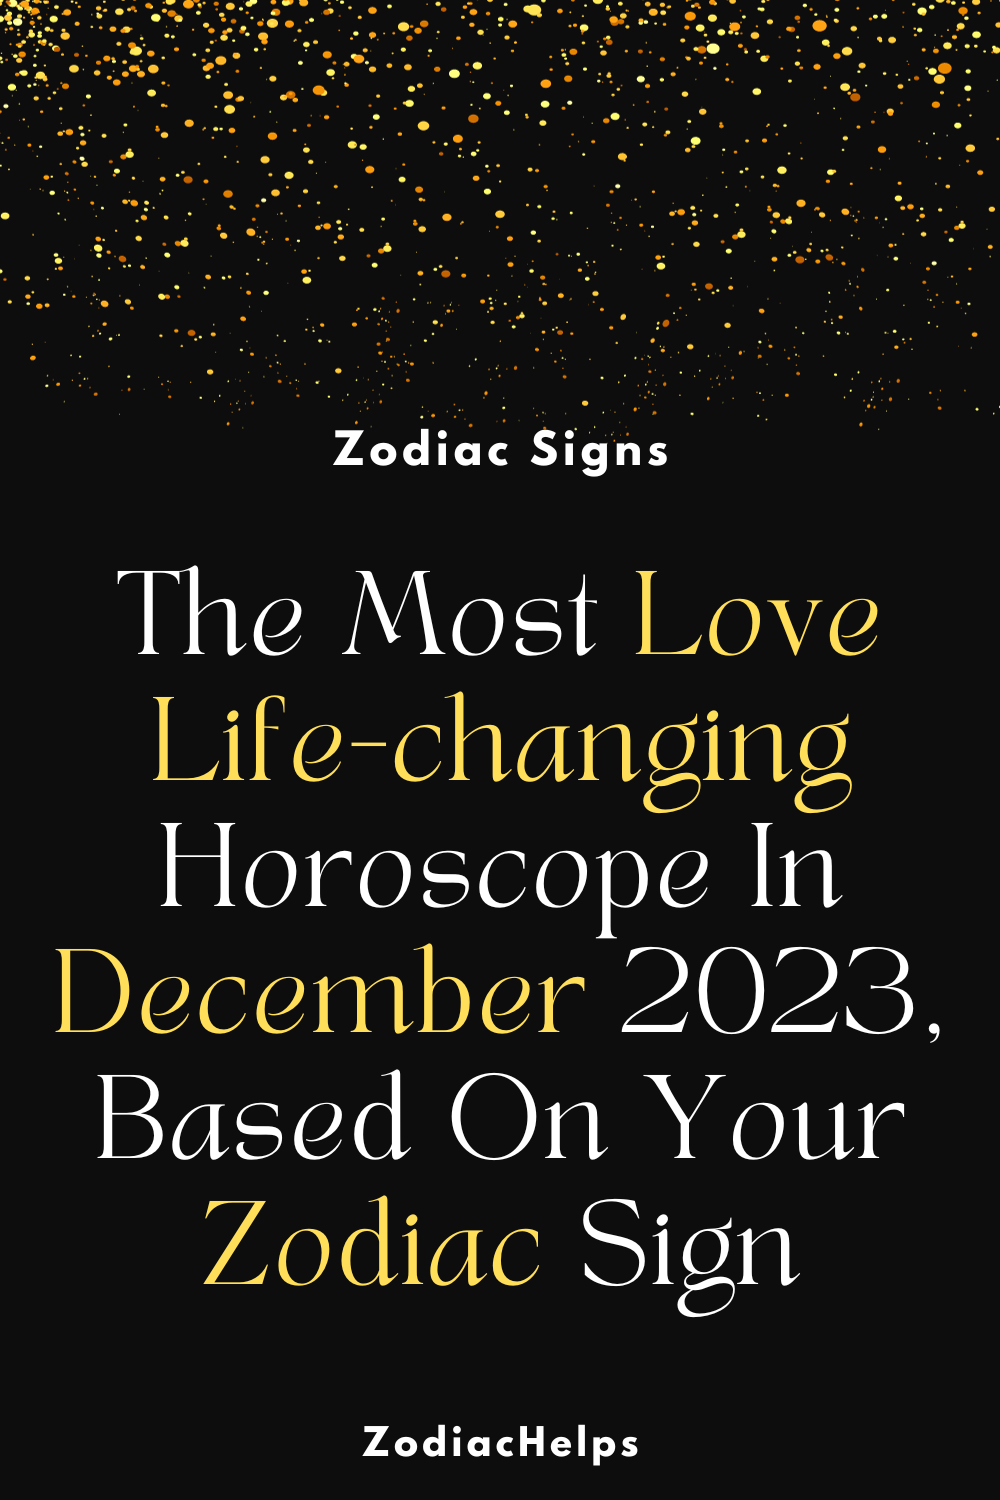 The Most Love Life-changing Horoscope In December 2023, Based On Your Zodiac Sign